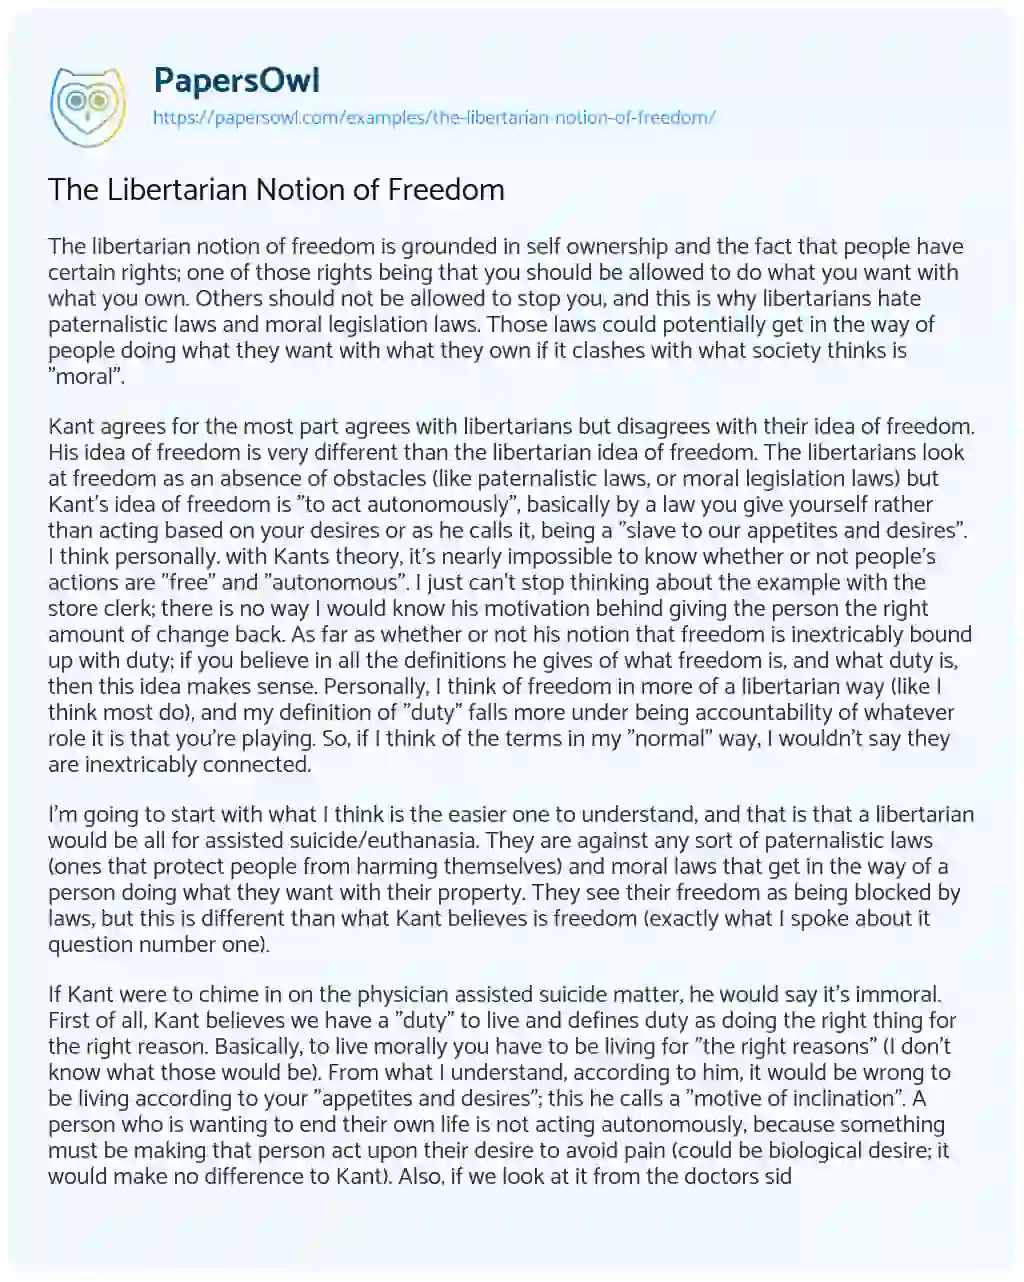 Essay on The Libertarian Notion of Freedom